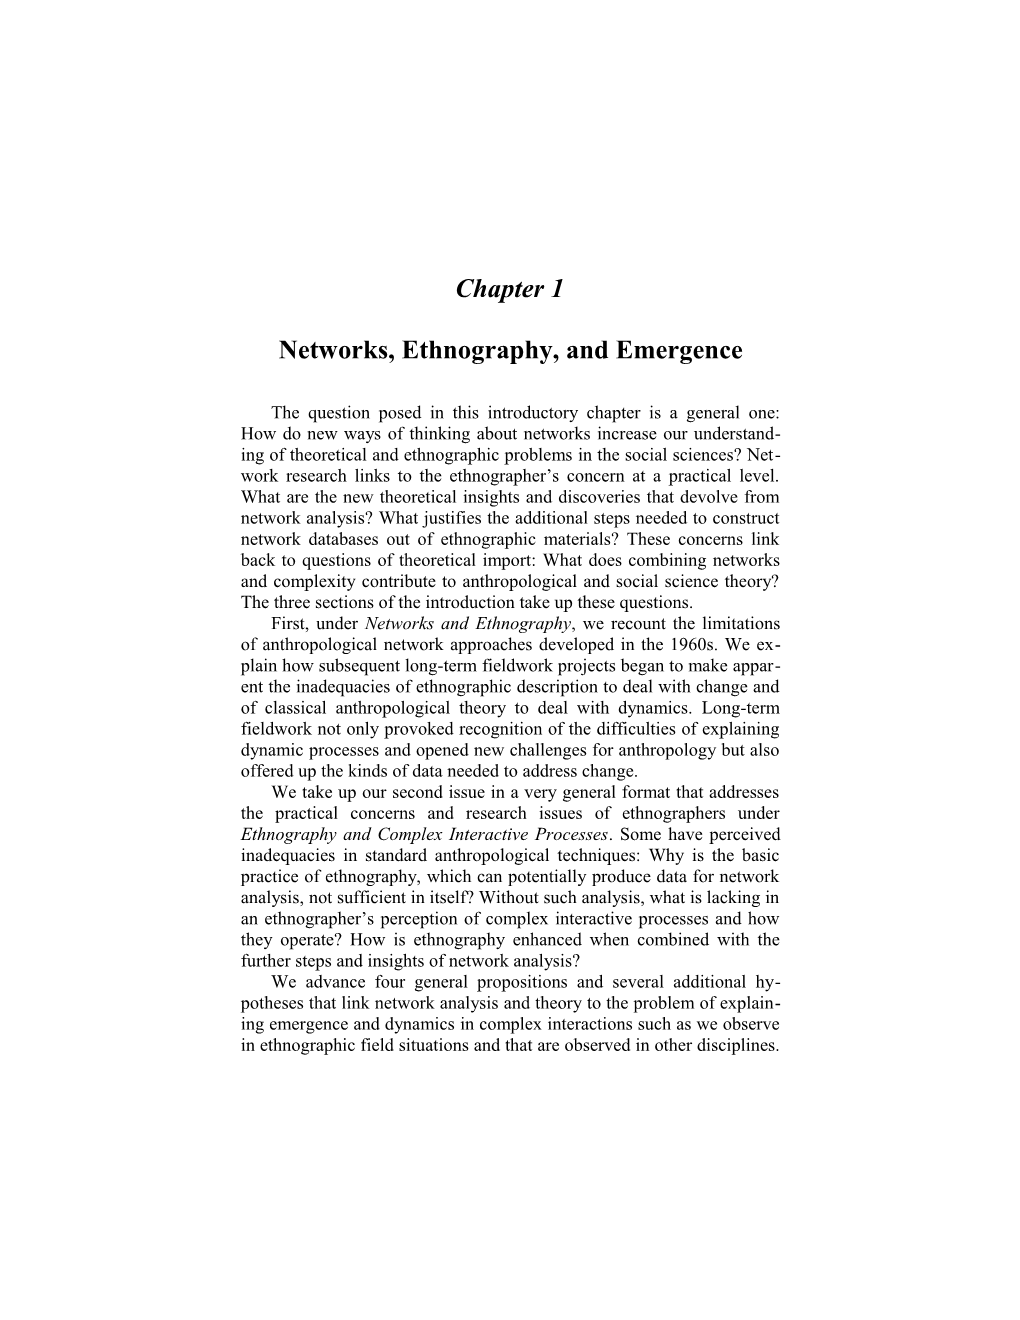 Networks, Ethnography, and Emergence